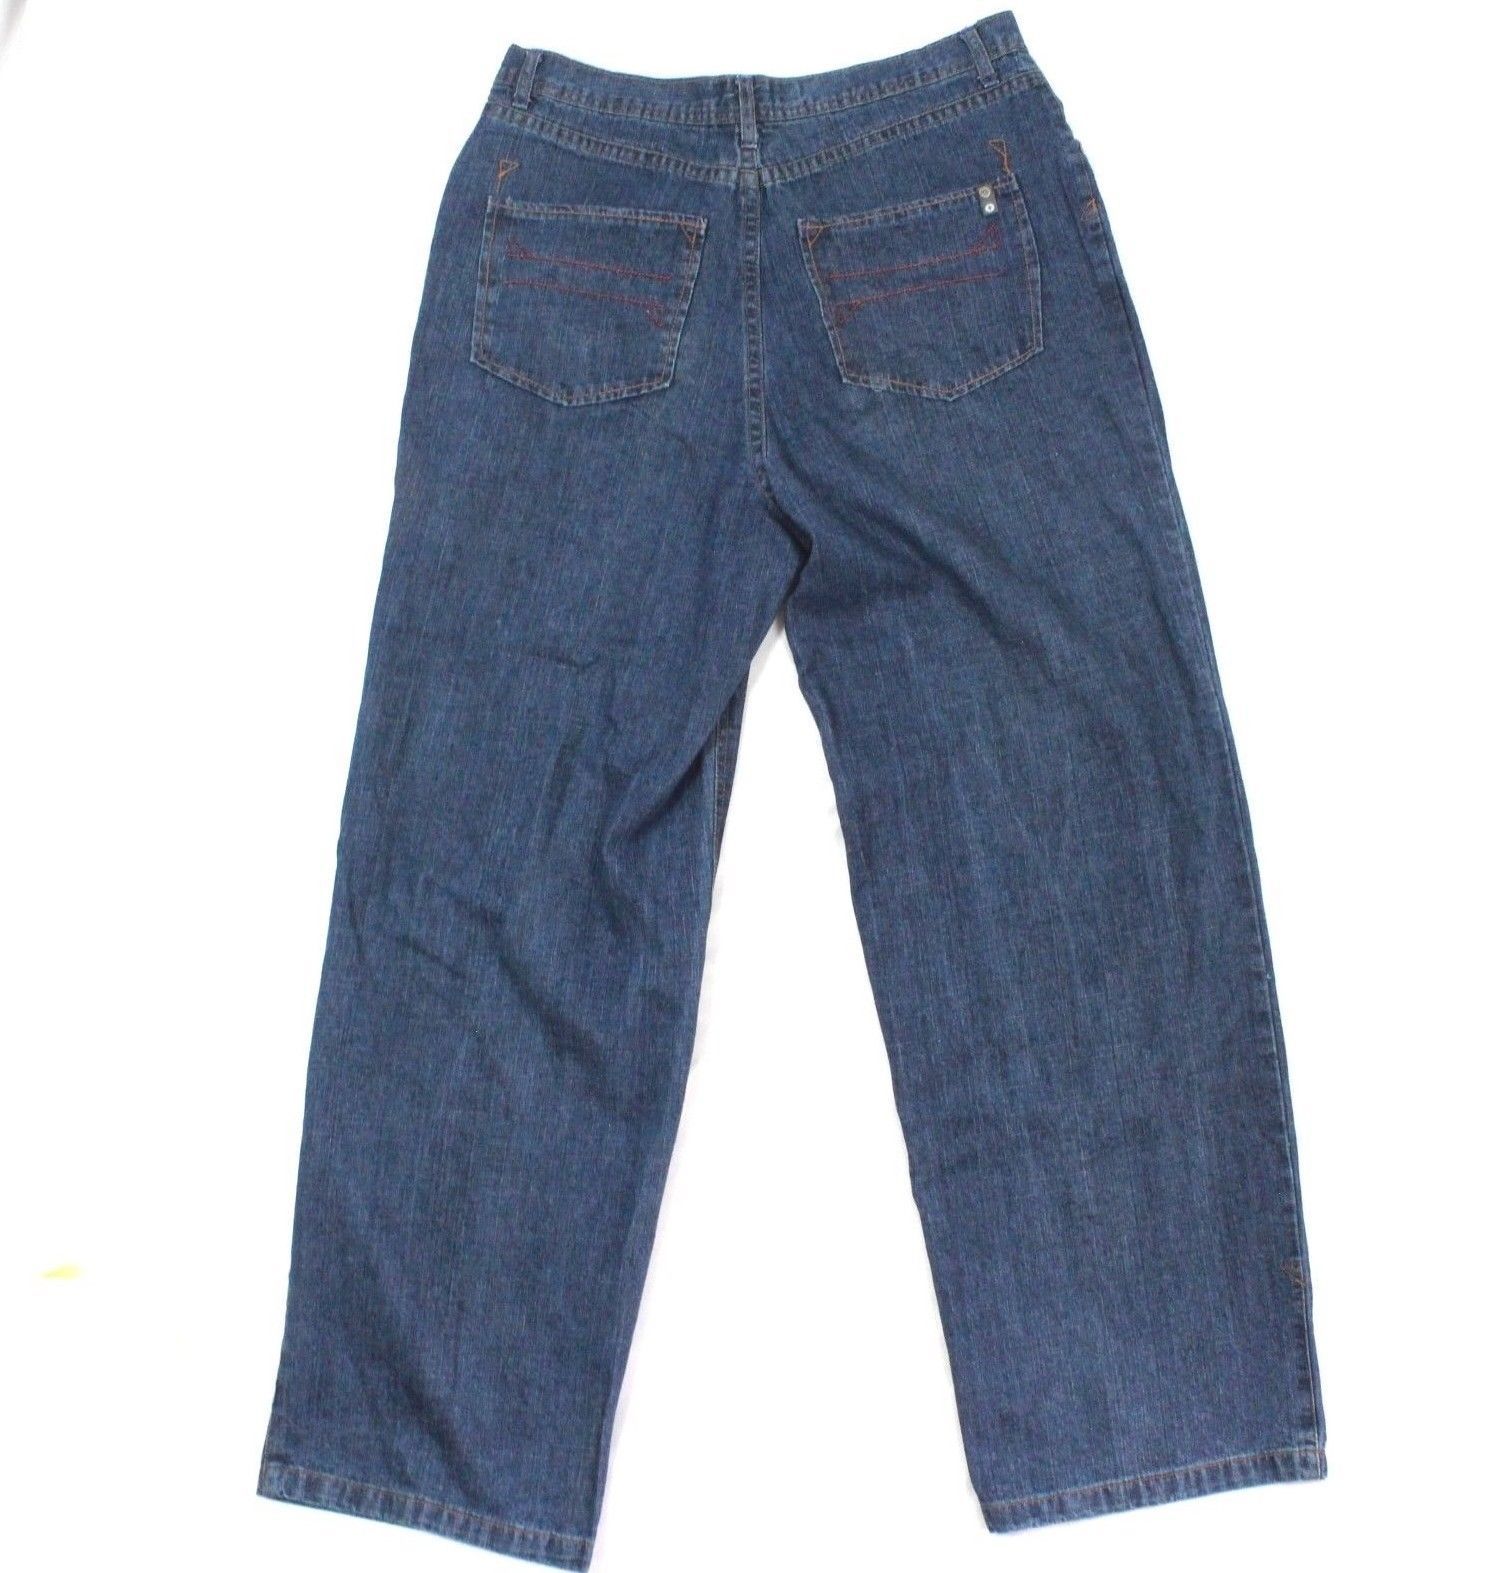 90s Southpole Jeans Baggy Fit Straight Leg 36 x 32 Inseam Dark Wash Hip ...